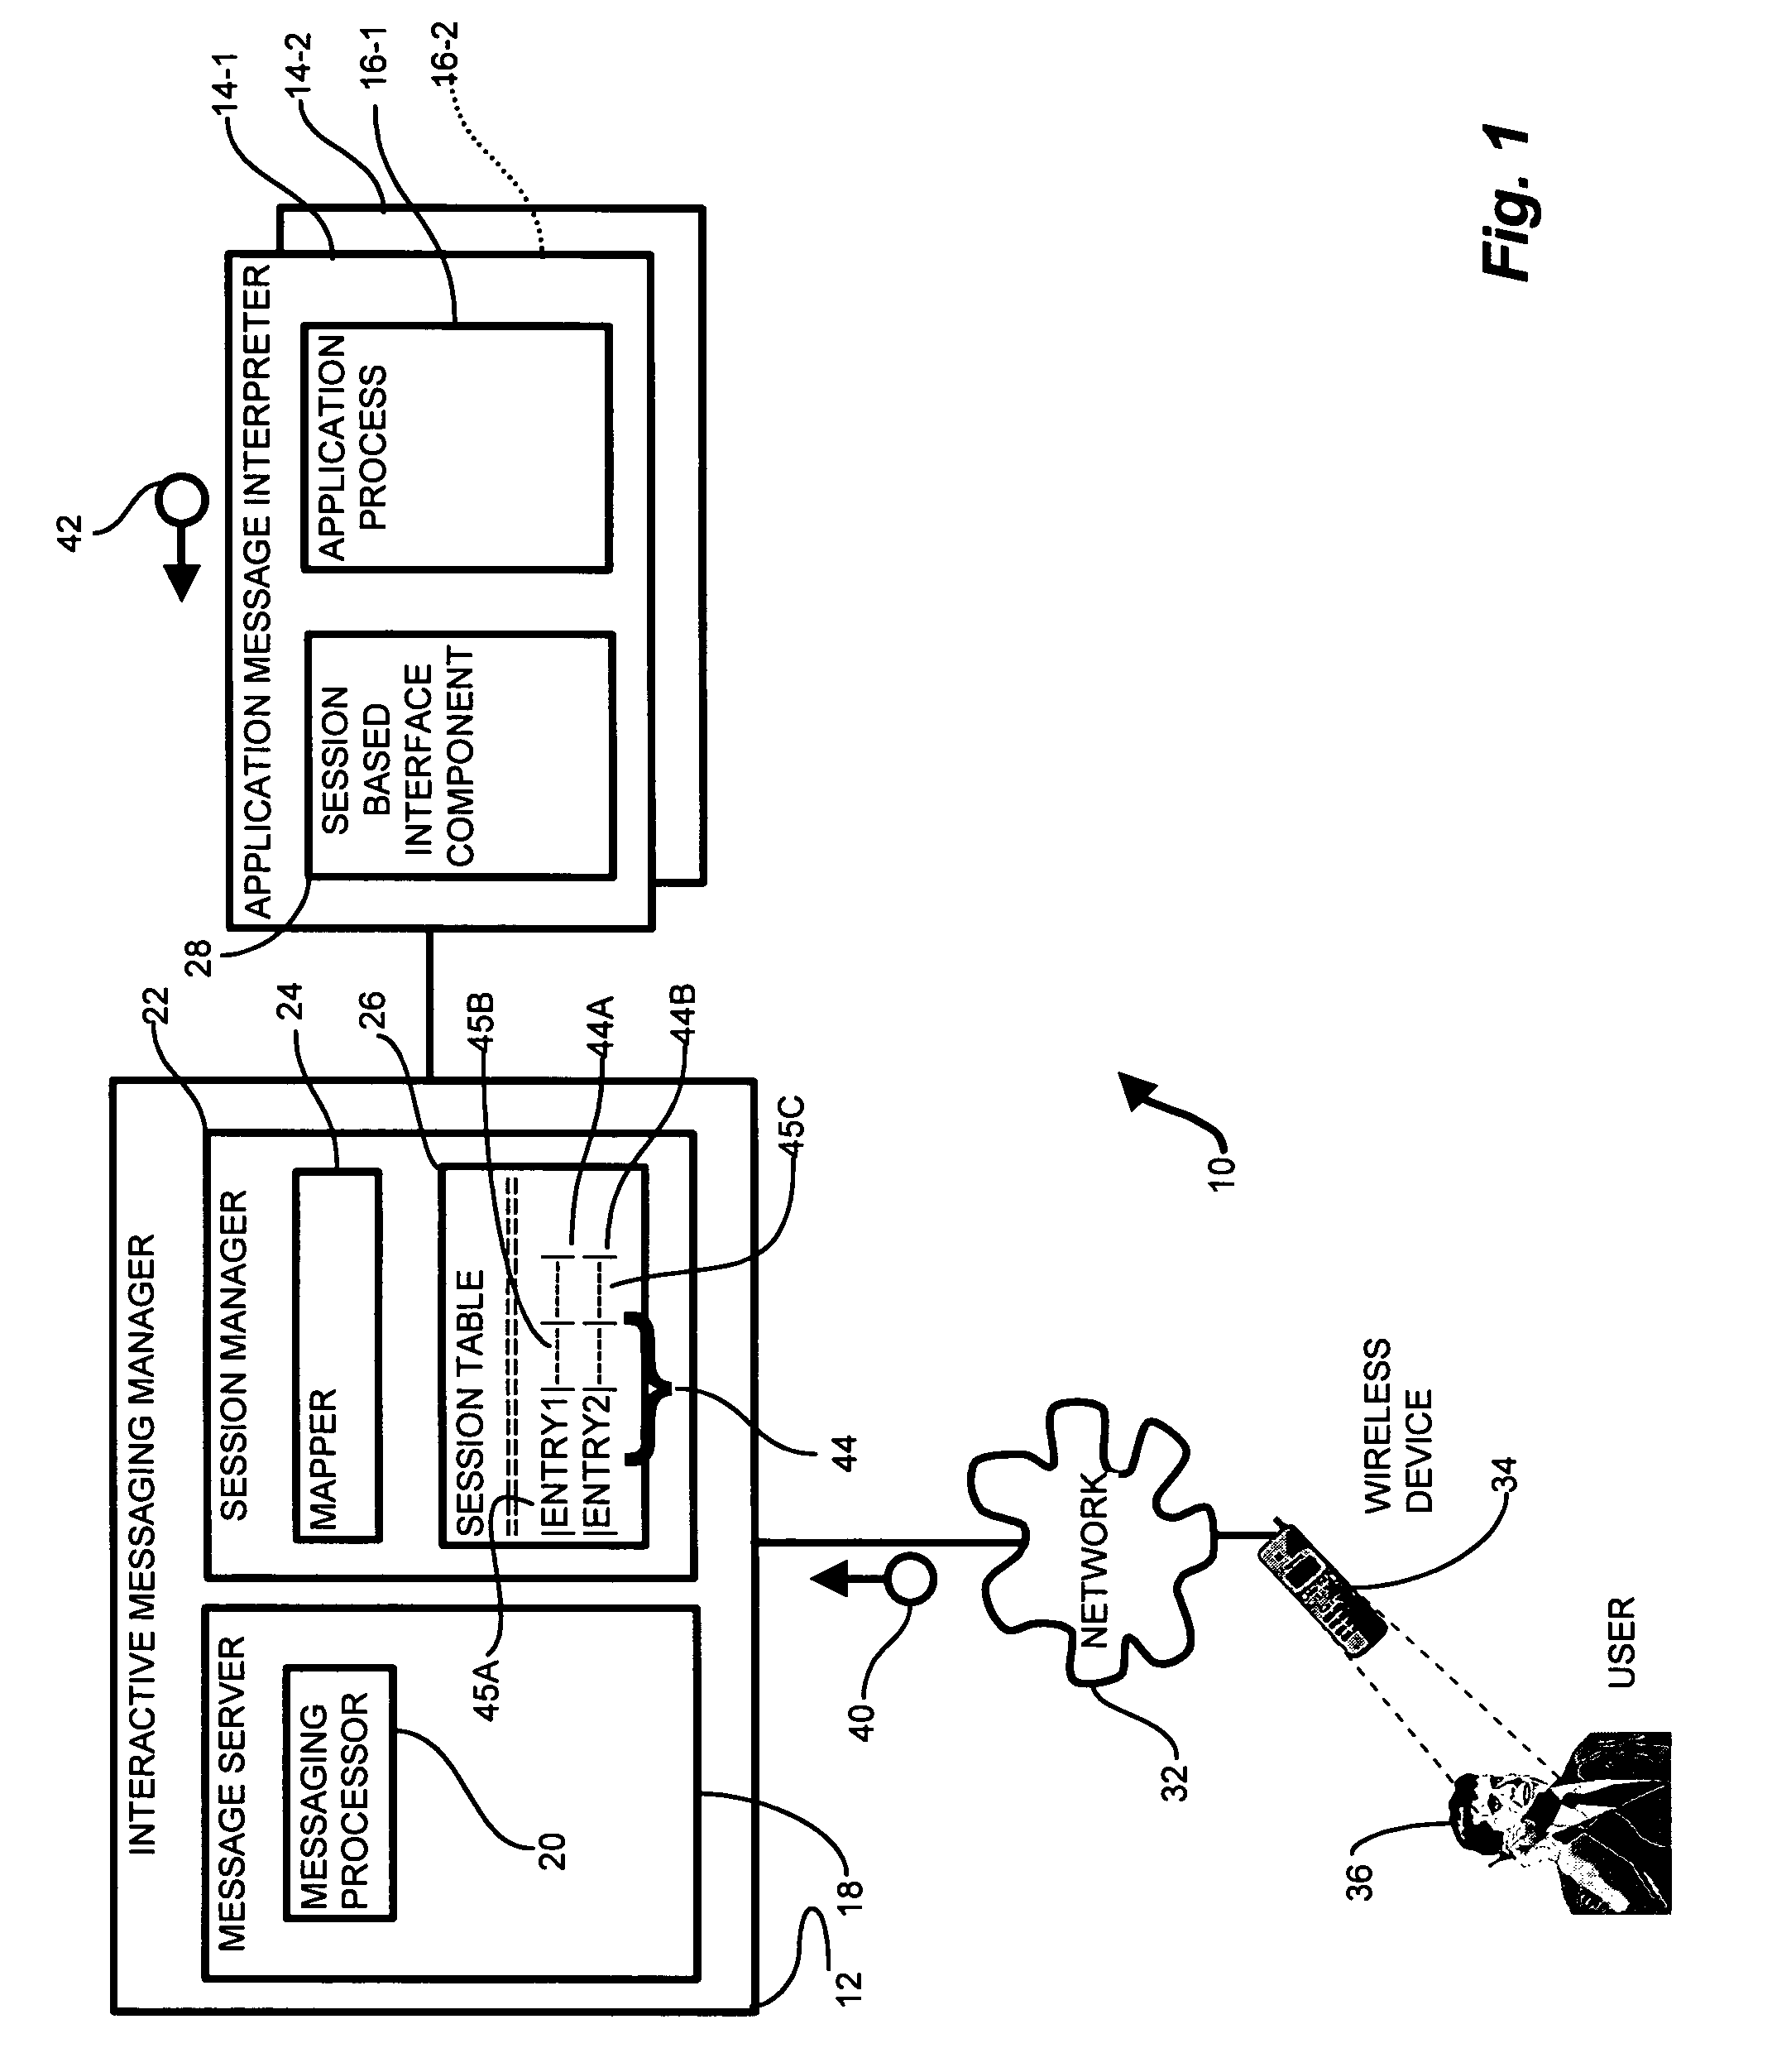 System and methods for controlling an application